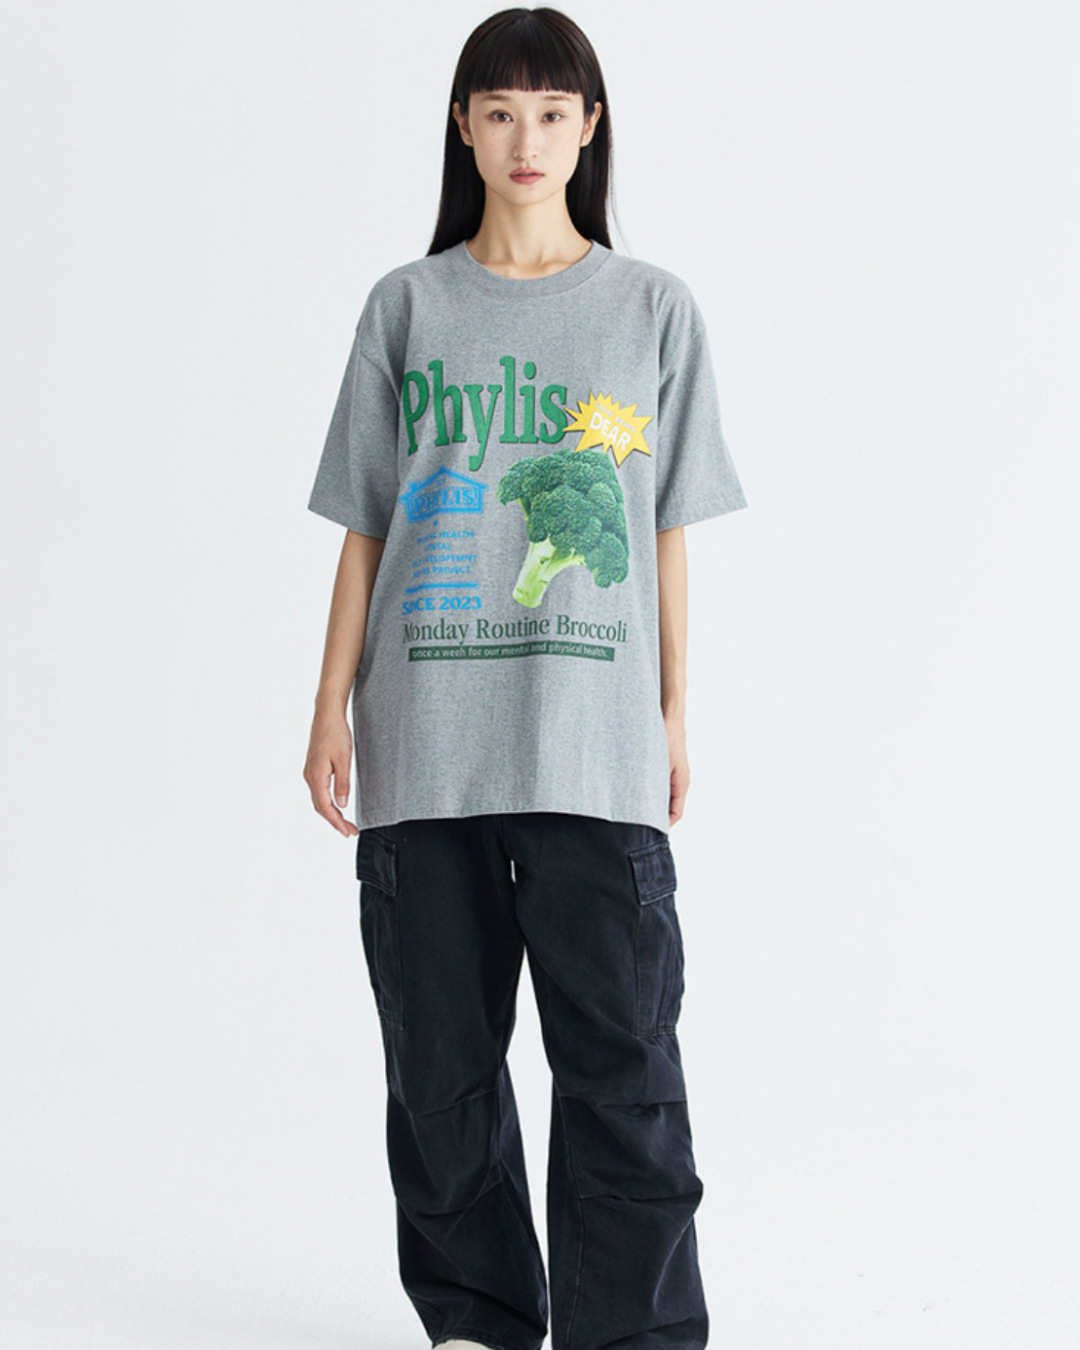 Phylis Oversized Tee in Grey